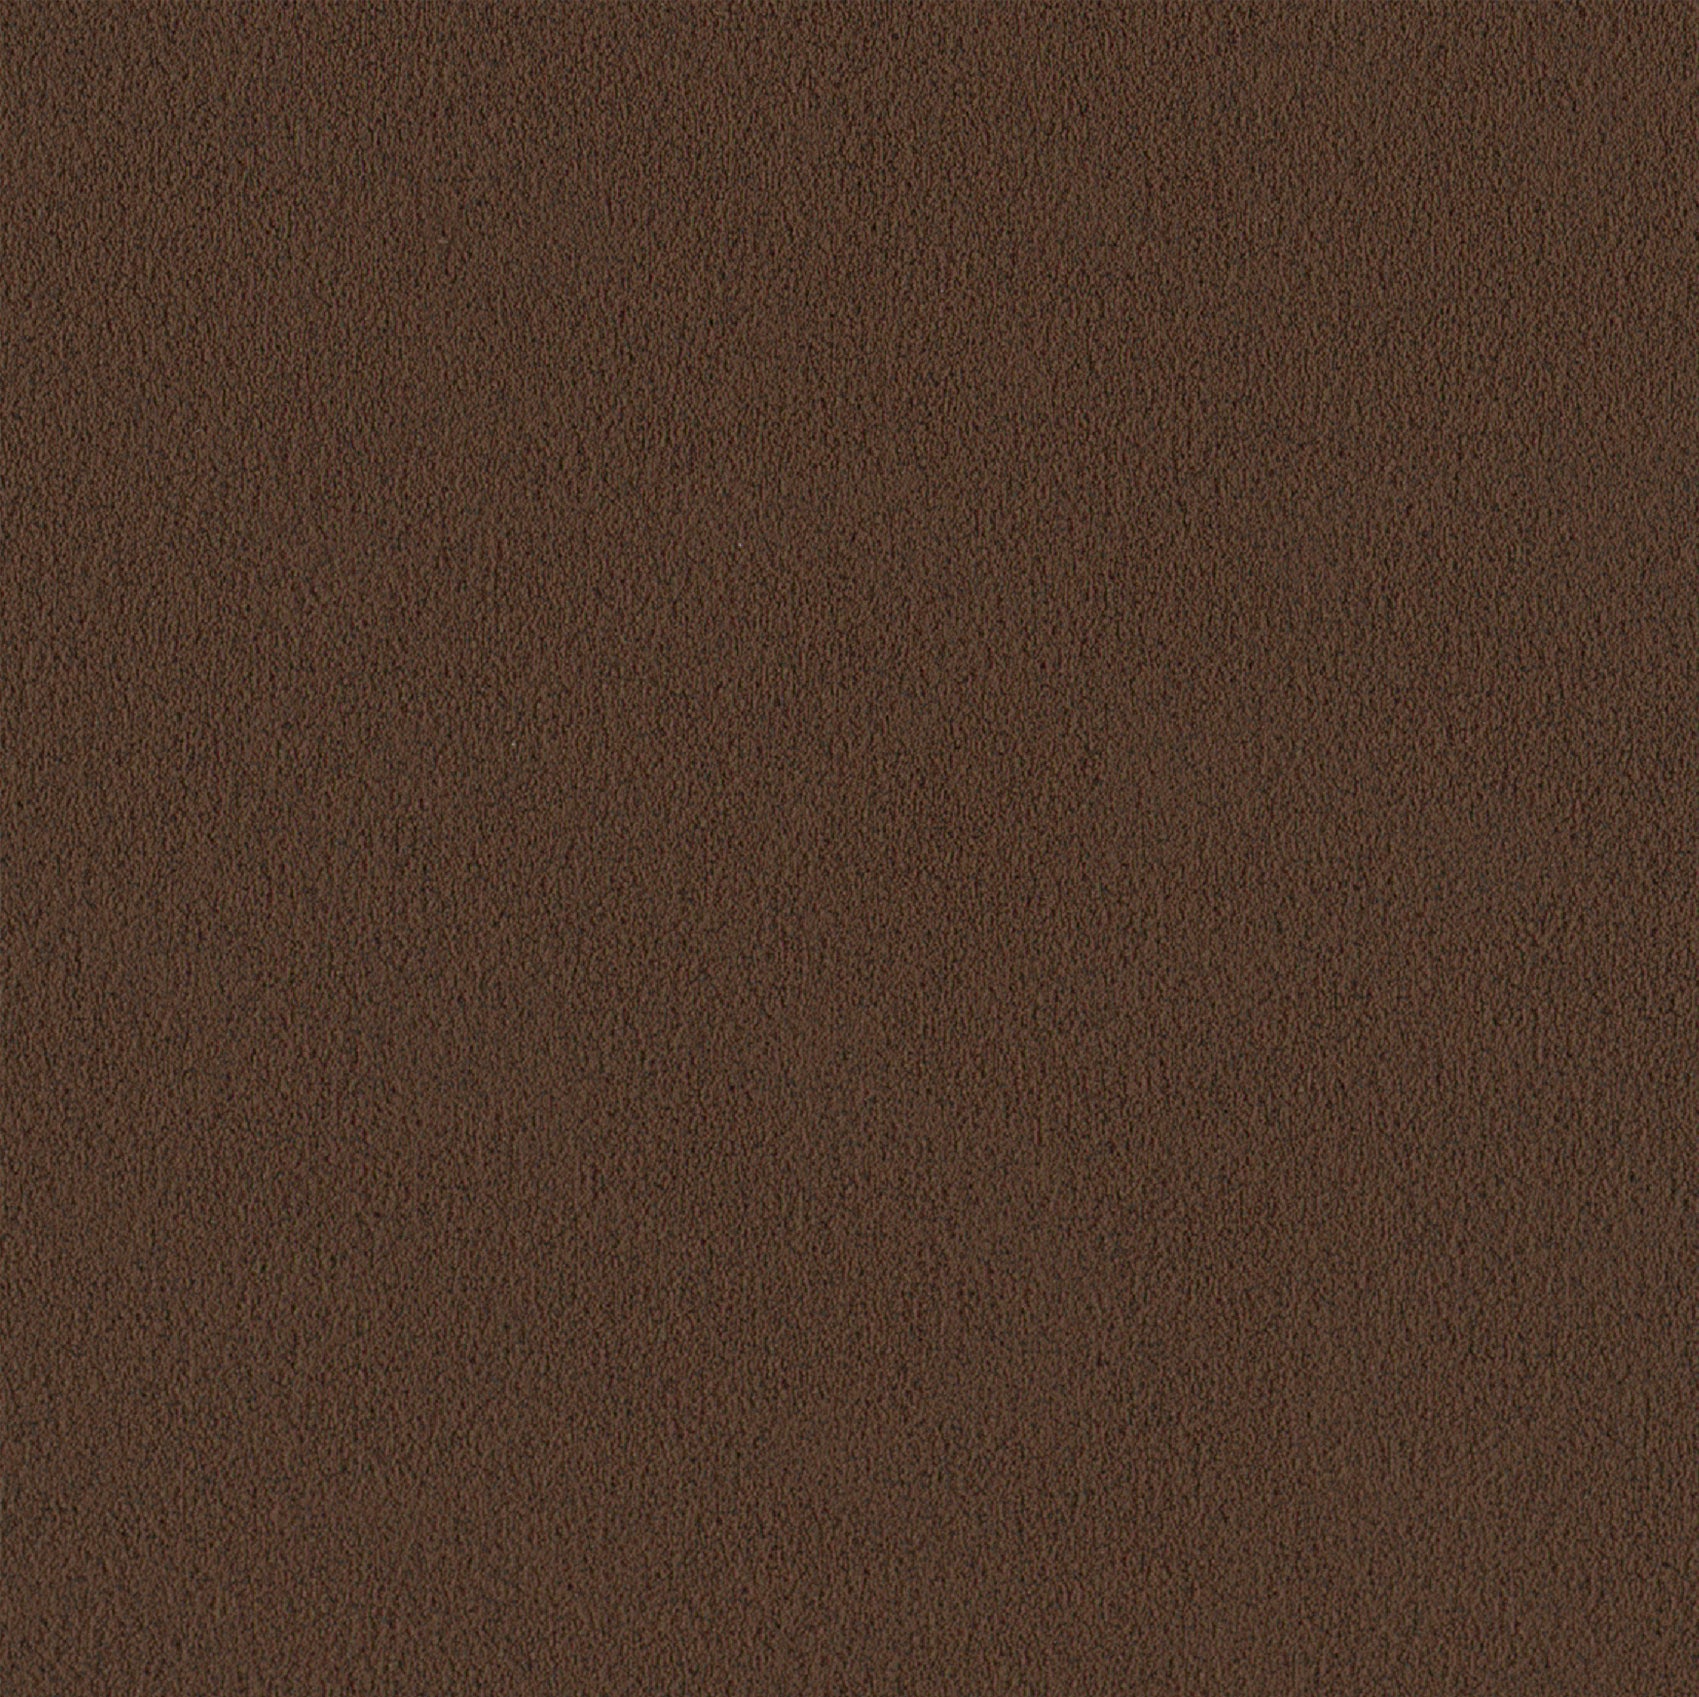 Andriali-Contract-Vinyl_Upholstery-Design-Serenity-Color-340CharBrown-Width-140cm